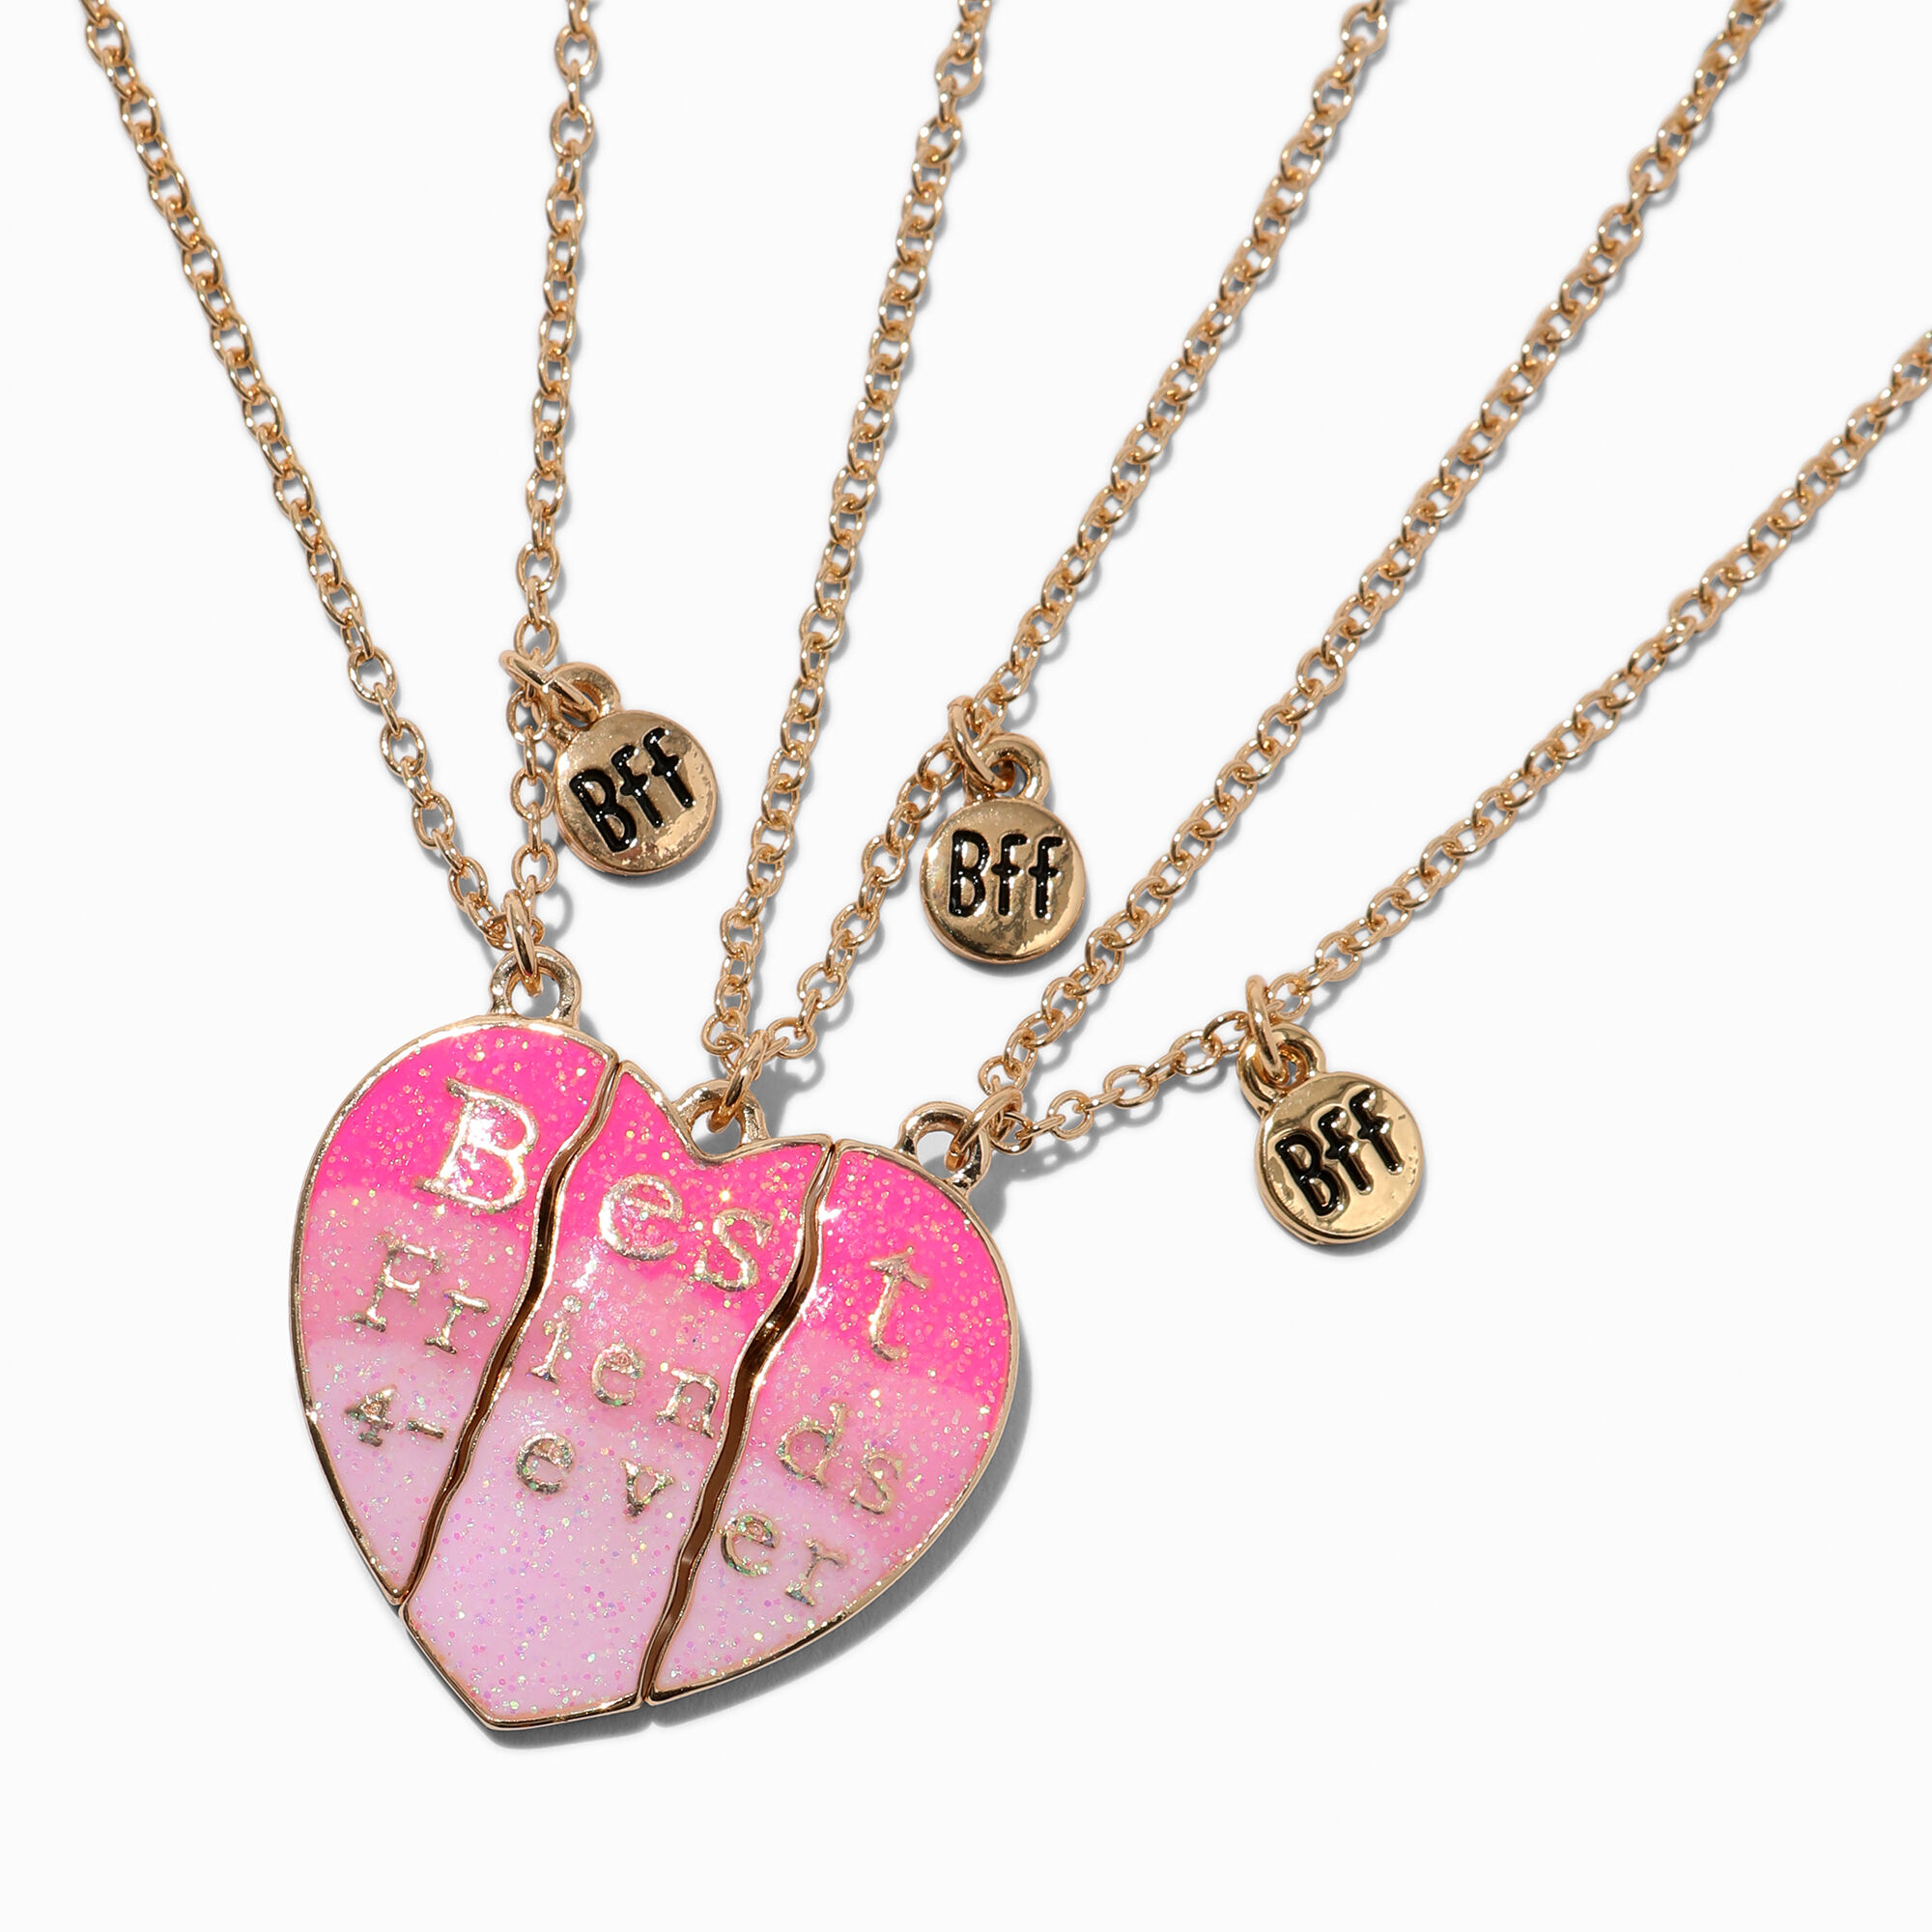 SANNIDHI BFF Necklace for 2 Girls Best Friend Necklace for Women, Alloy  Half Heart Pendant Love Sisters Friendship Necklace for 2 Best Friends,  Birthday Graduation Gifts(One Pair) at Rs 470.00 | Gurugram| ID:  2850575138862